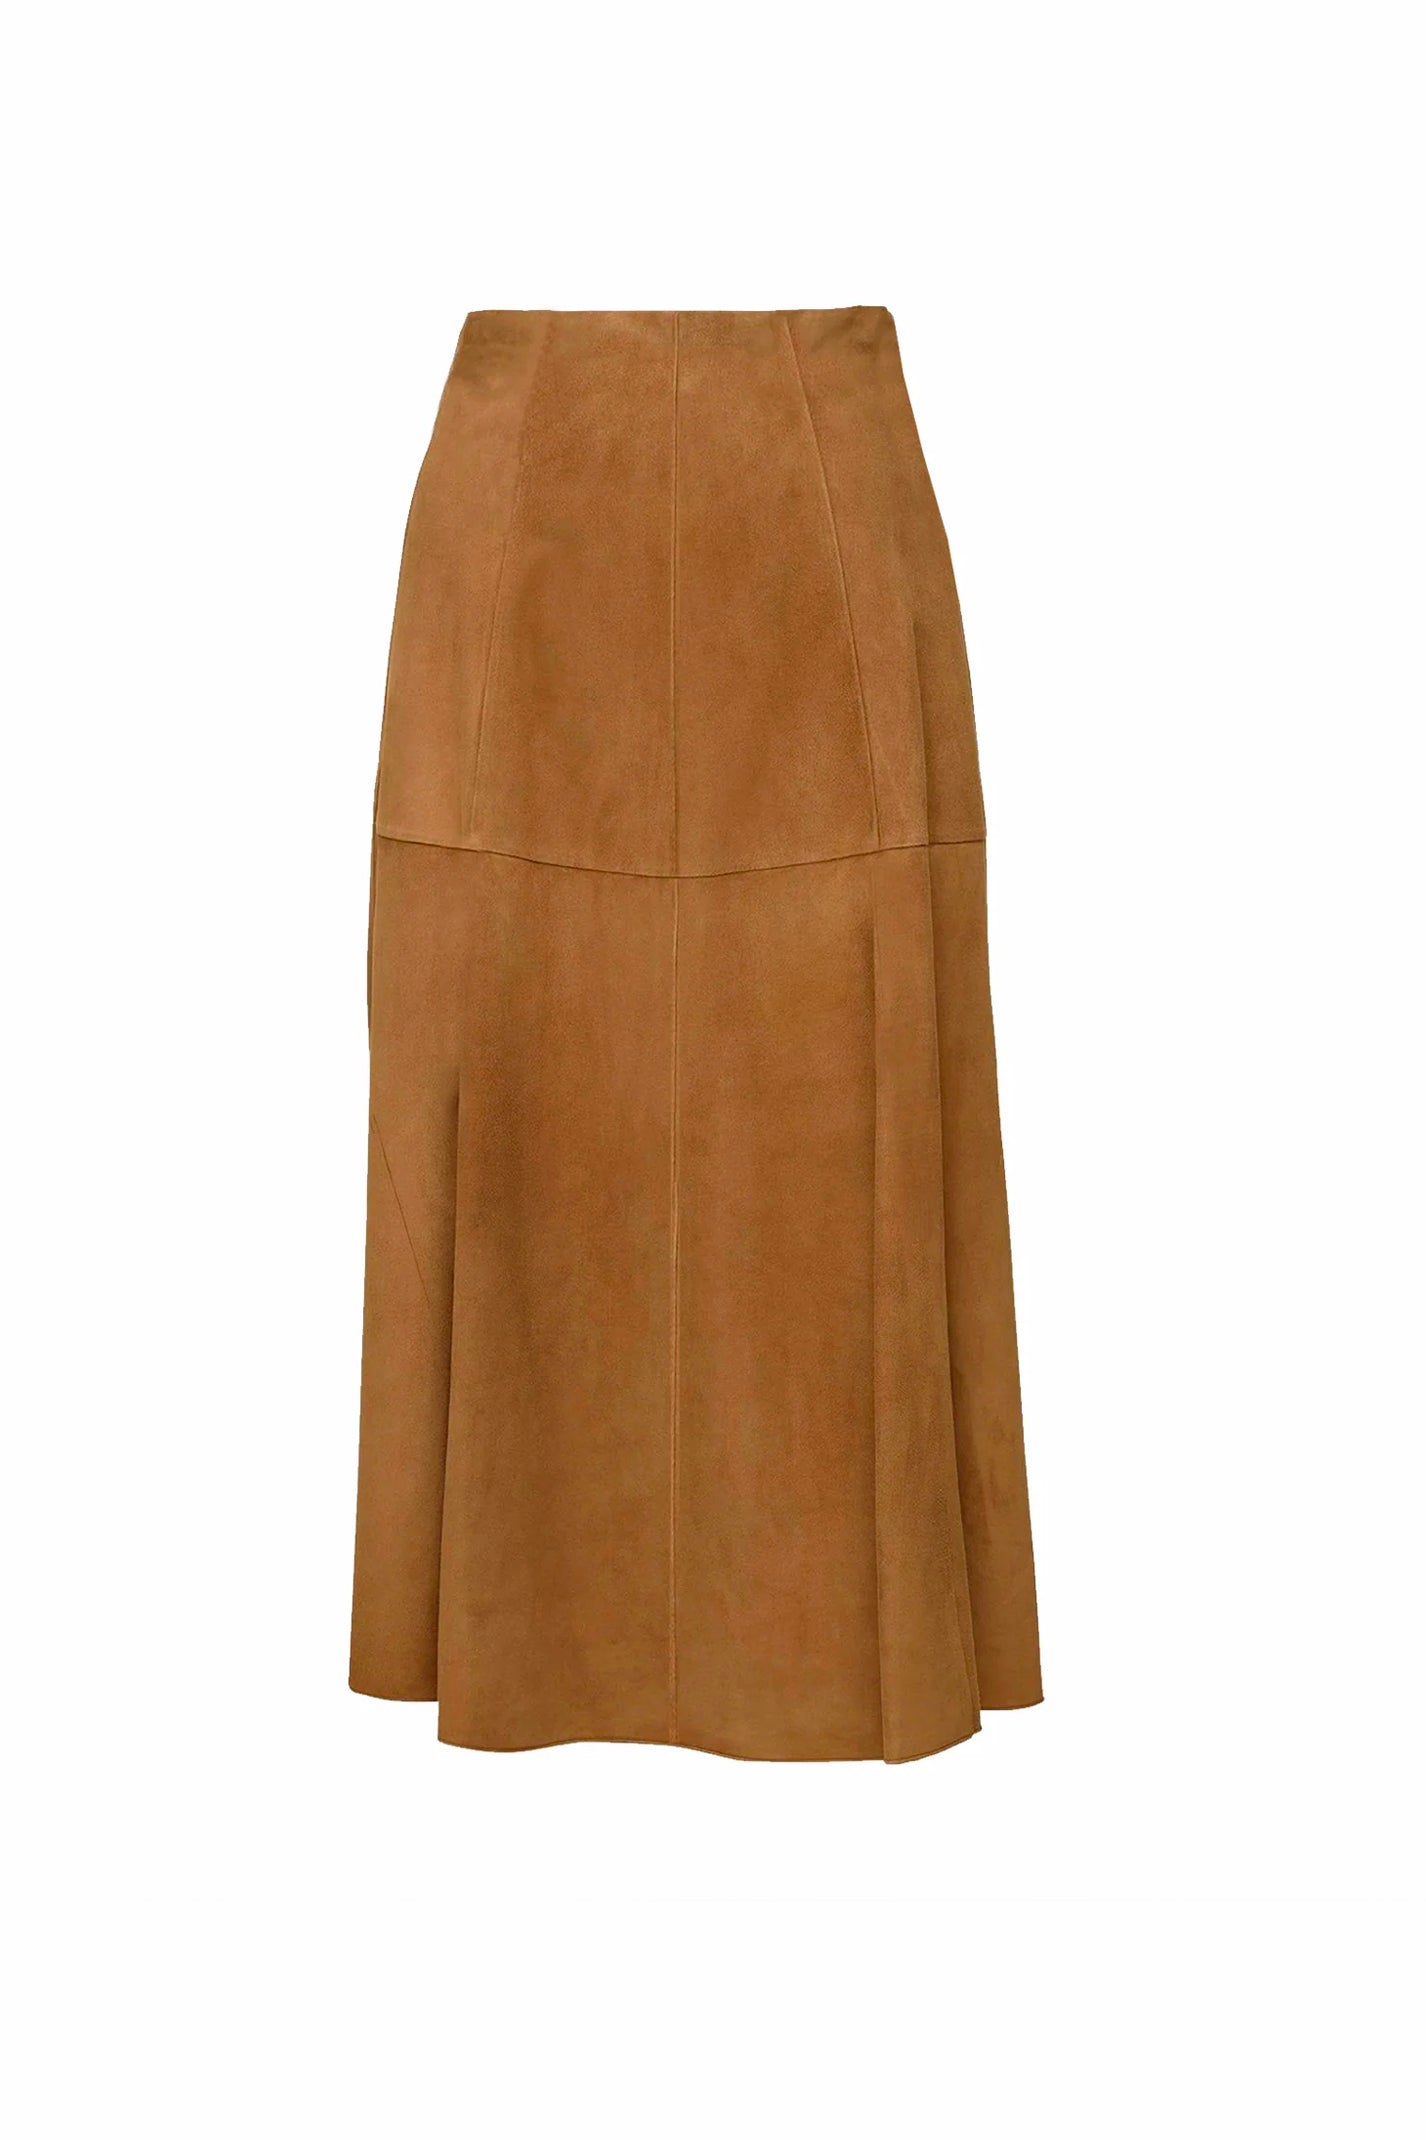 MADRID MAXI SKIRT - SUEDE